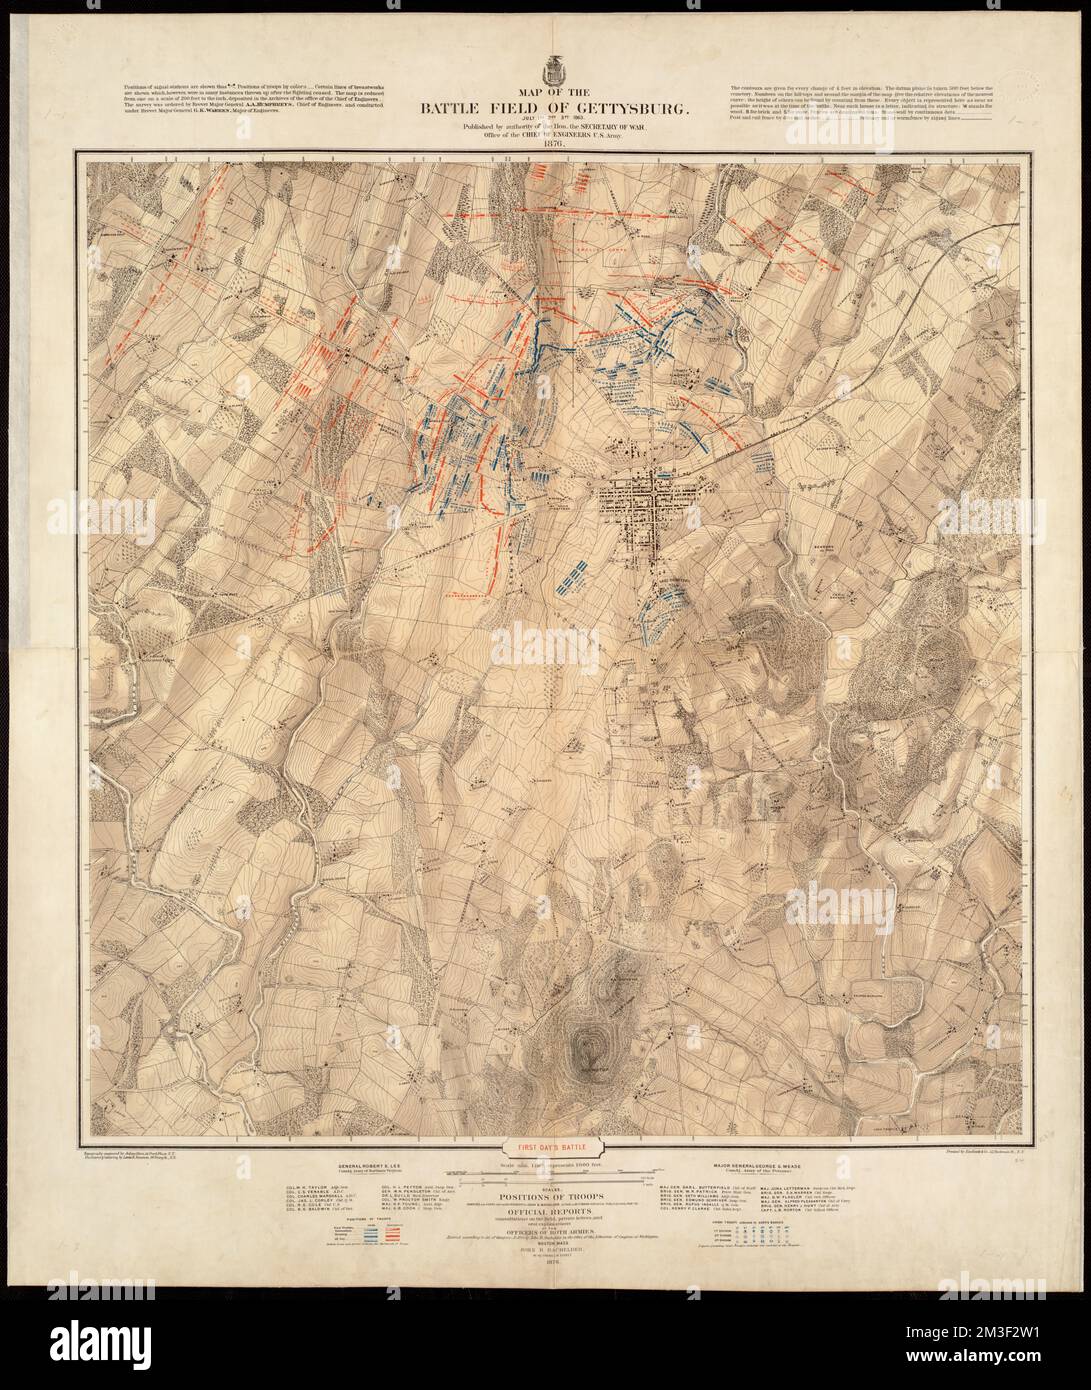 Map of the battlefield of Gettysburg, July 1st, 2nd, 3rd, 1863 : First day's battle , Gettysburg, Battle of, Gettysburg, Pa., 1863, Maps, Gettysburg Pa., Maps Stock Photo